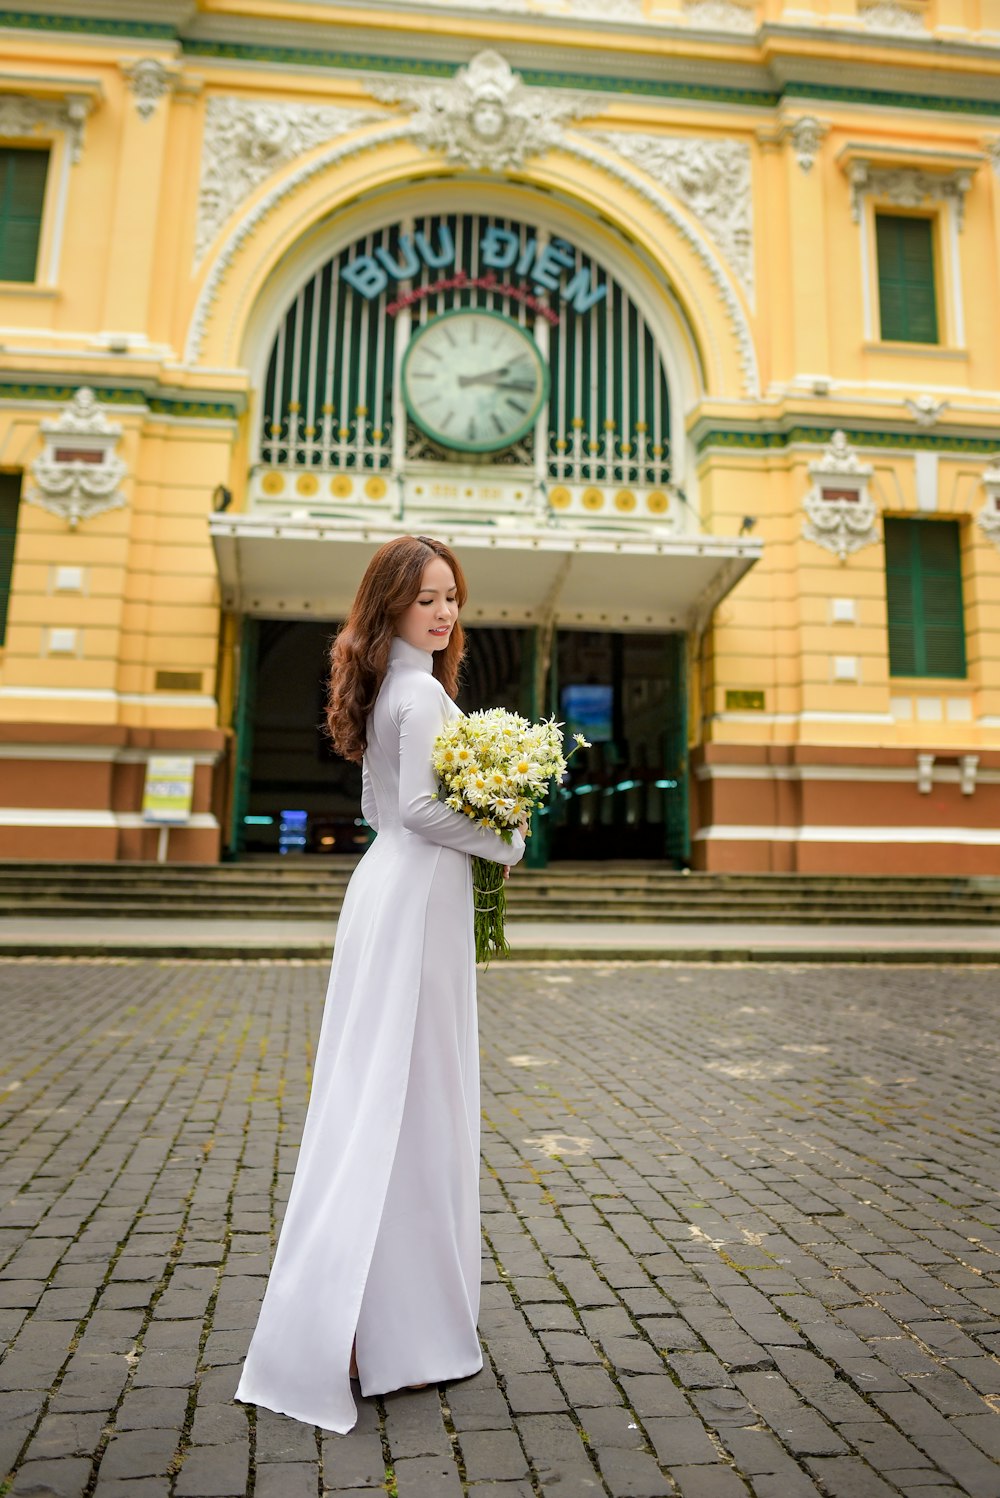 woman in white wedding dress holding bouquet of flowers standing on gray brick floor during daytime